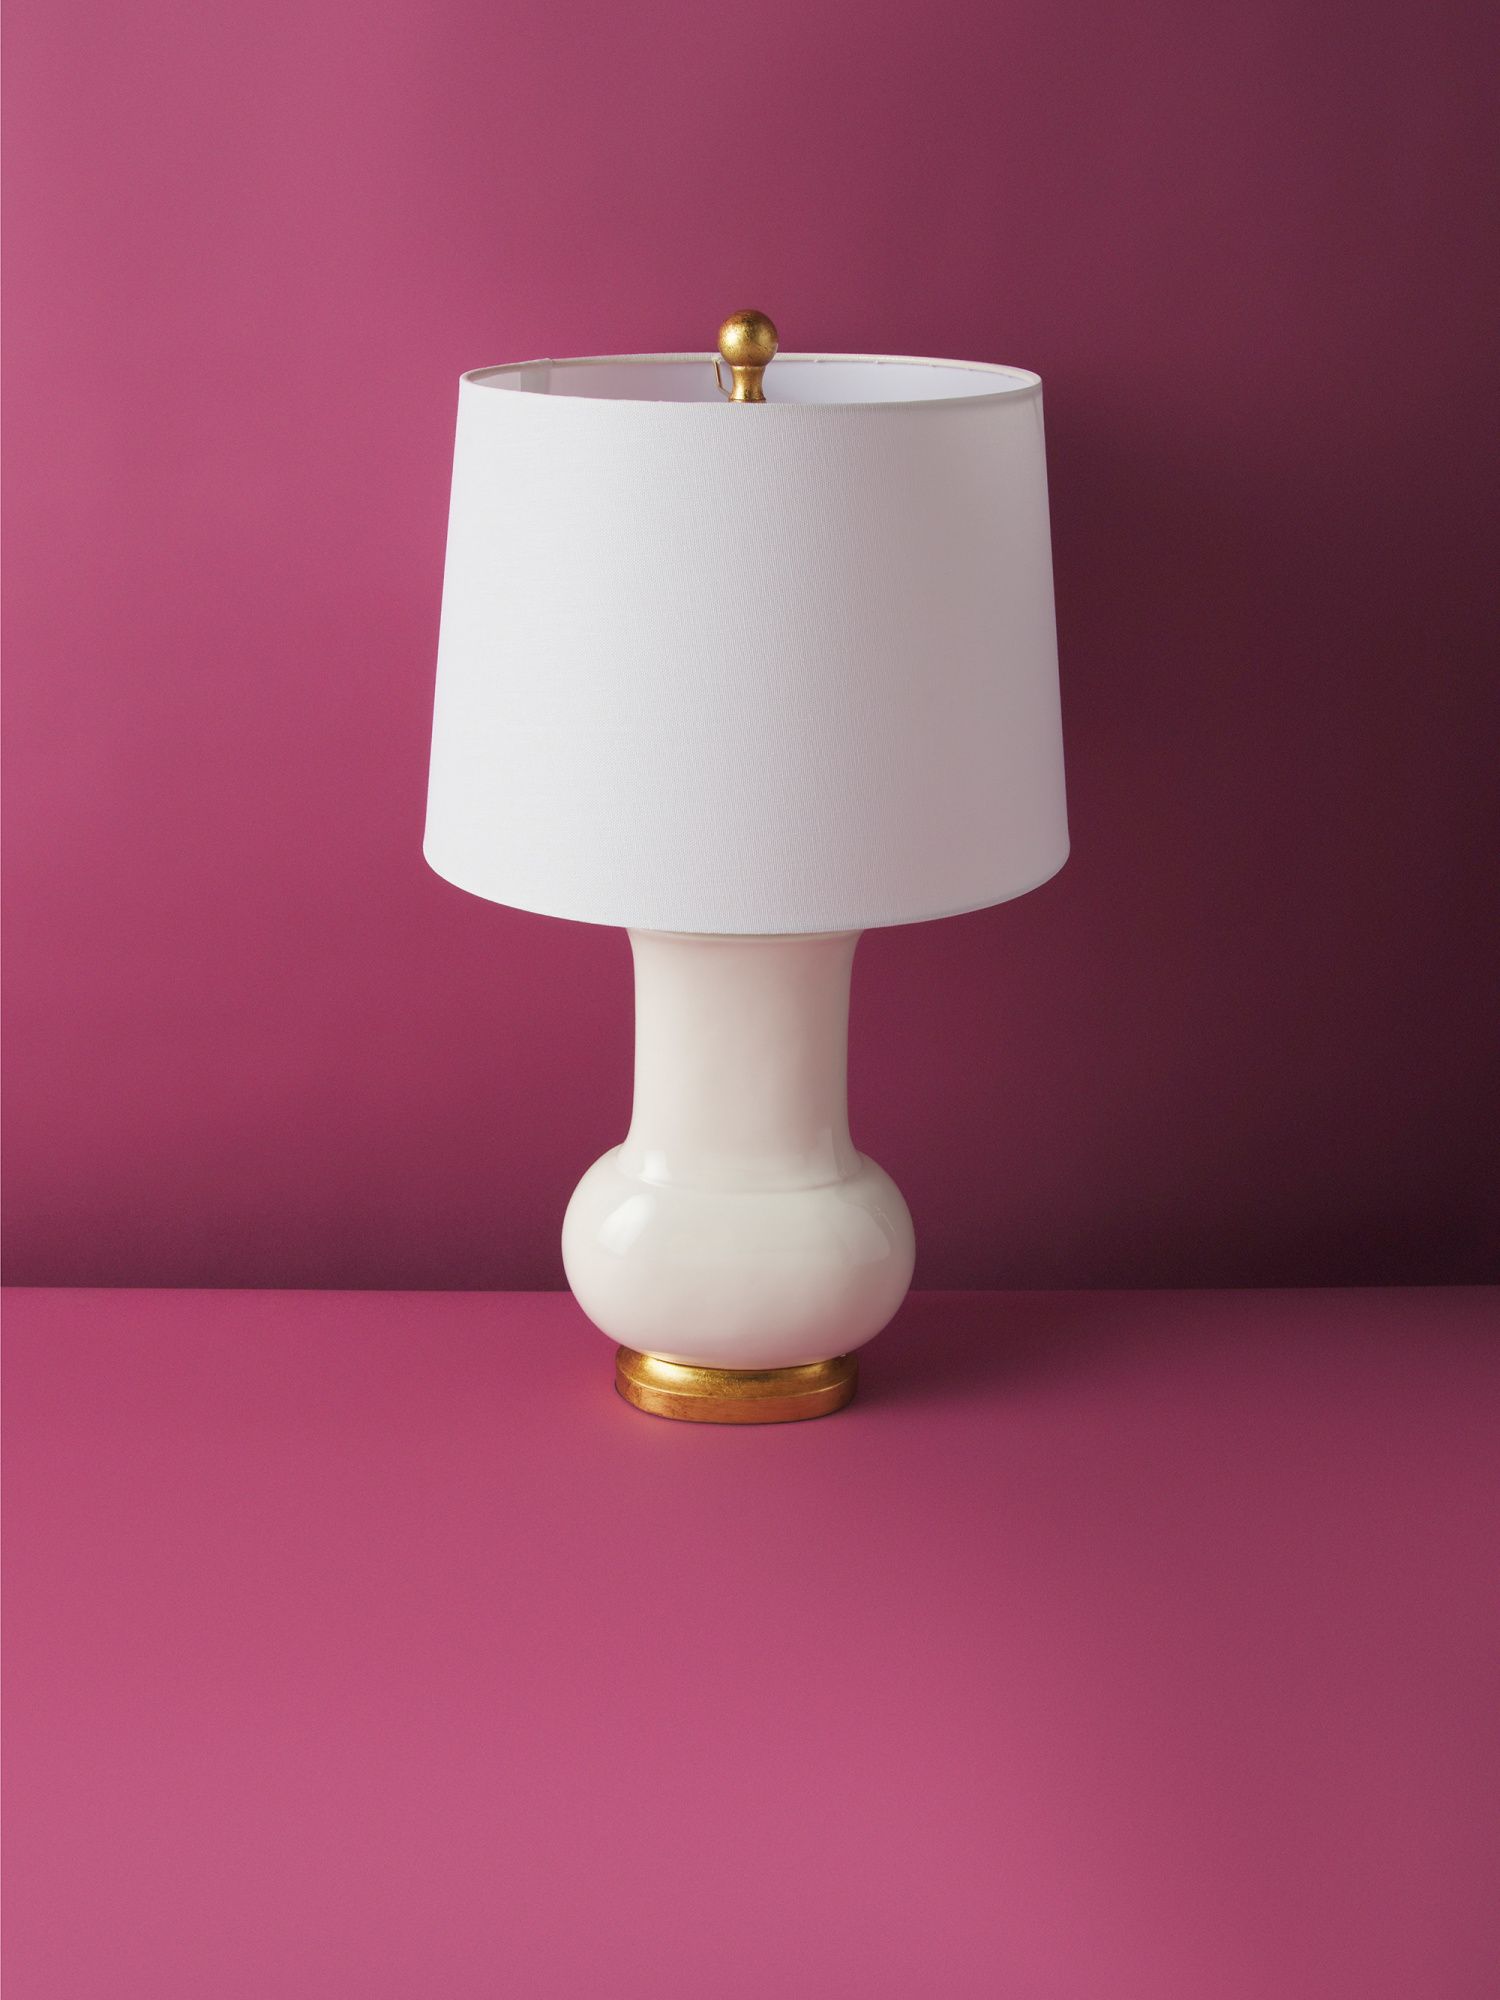 24in Emberson Ceramic Table Lamp | Table Lamps | HomeGoods | HomeGoods